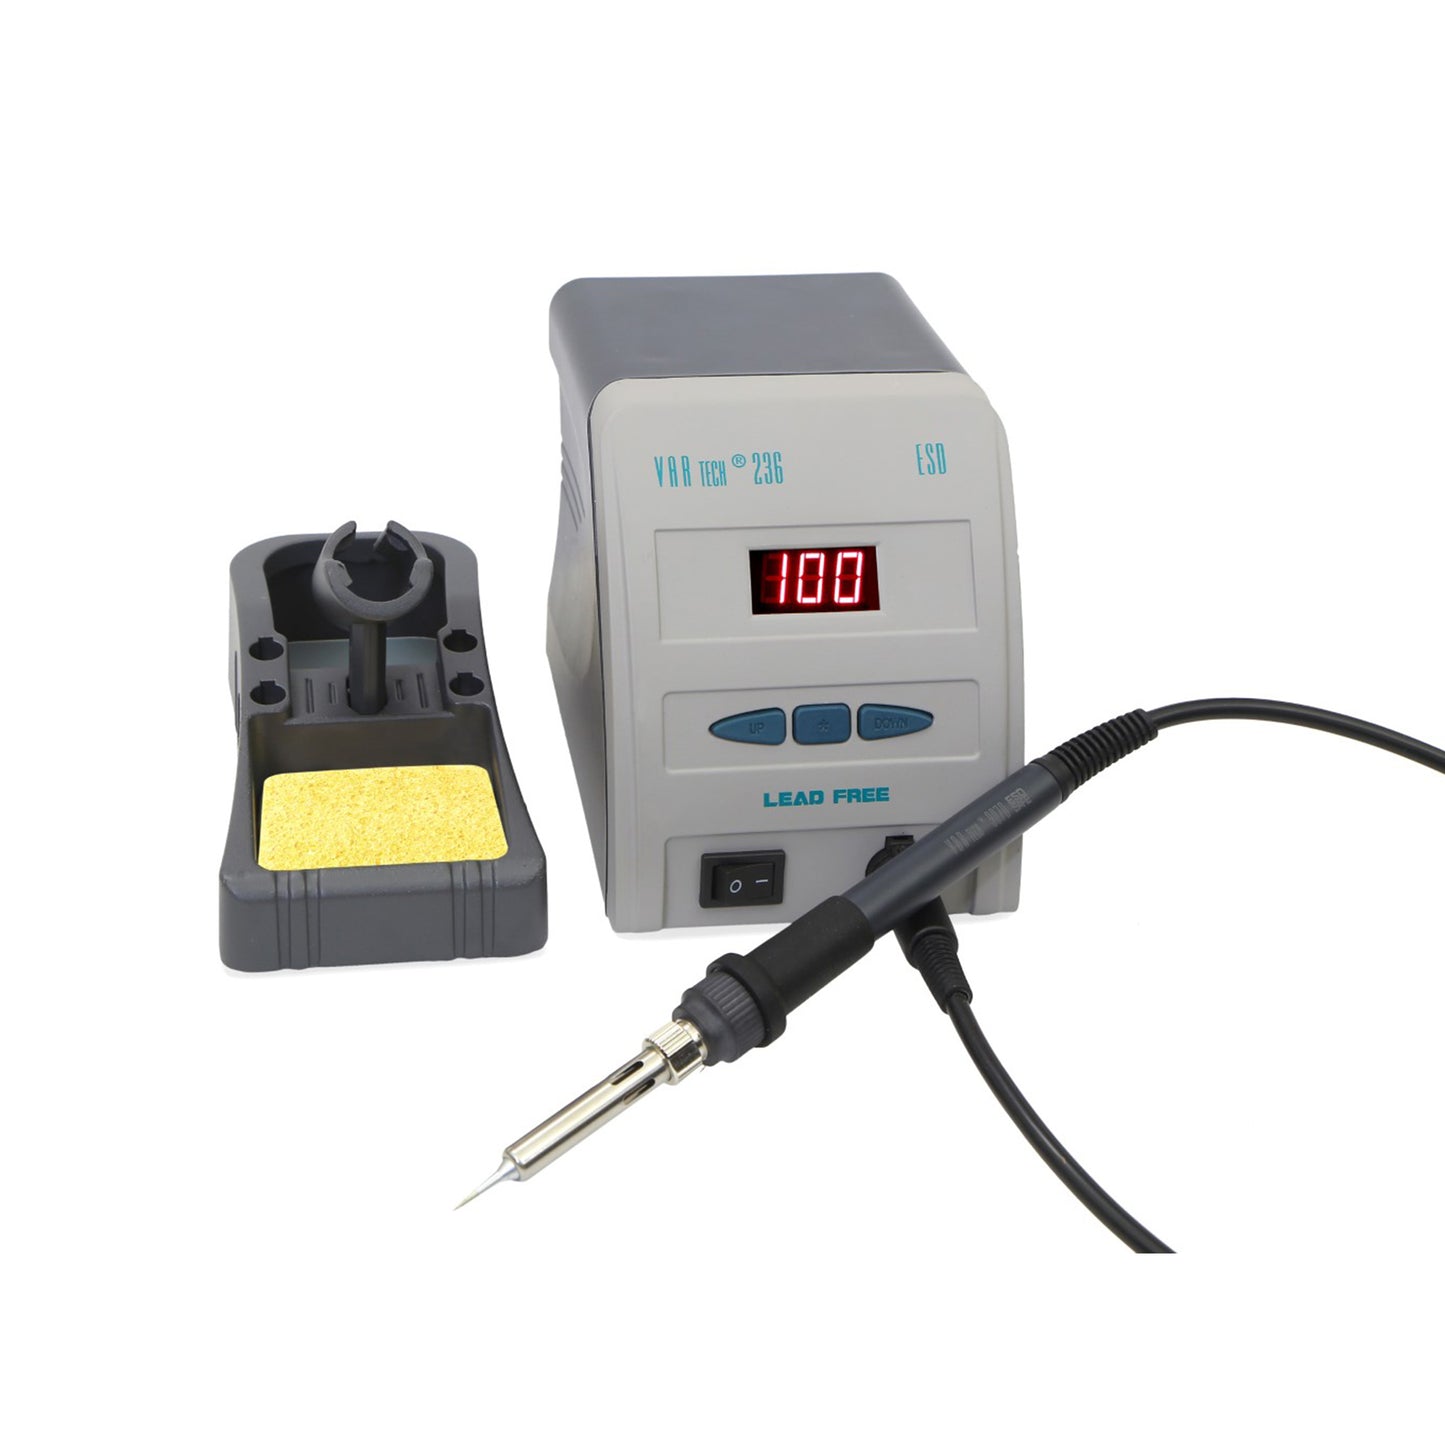 236 ESD lead free soldering station